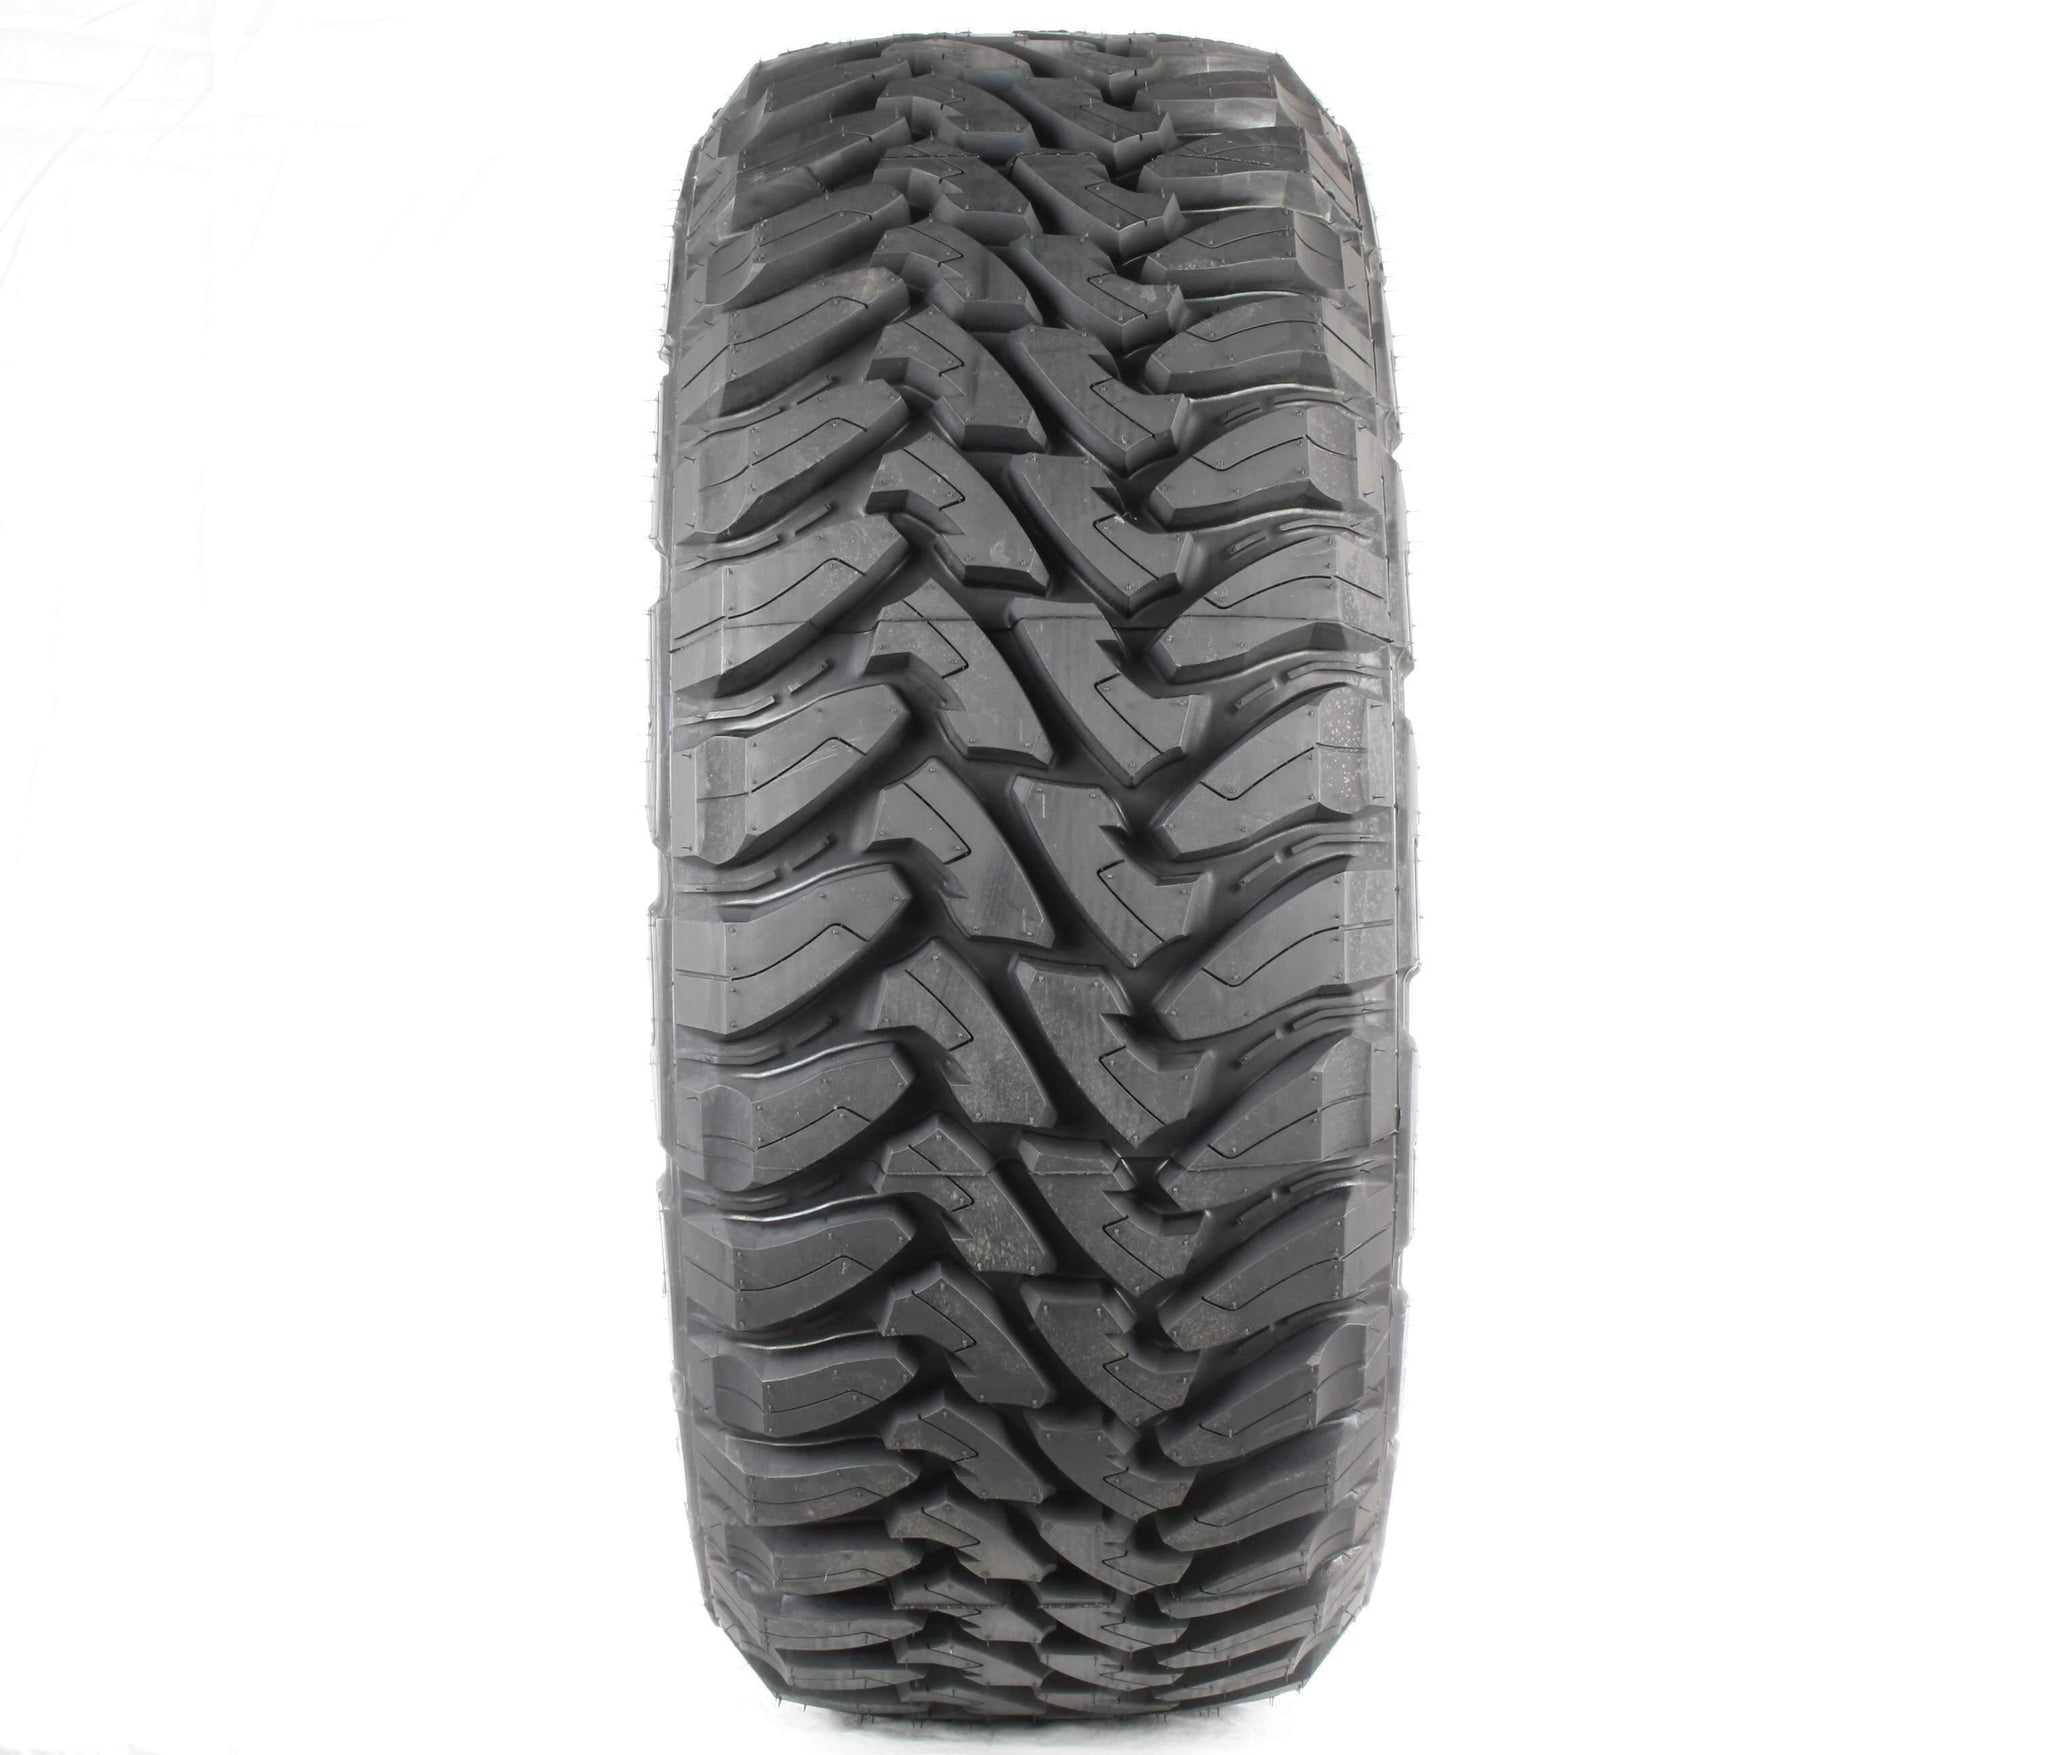 TOYO TIRES OPEN COUNTRY M/T 38X15.50R18LT Tires